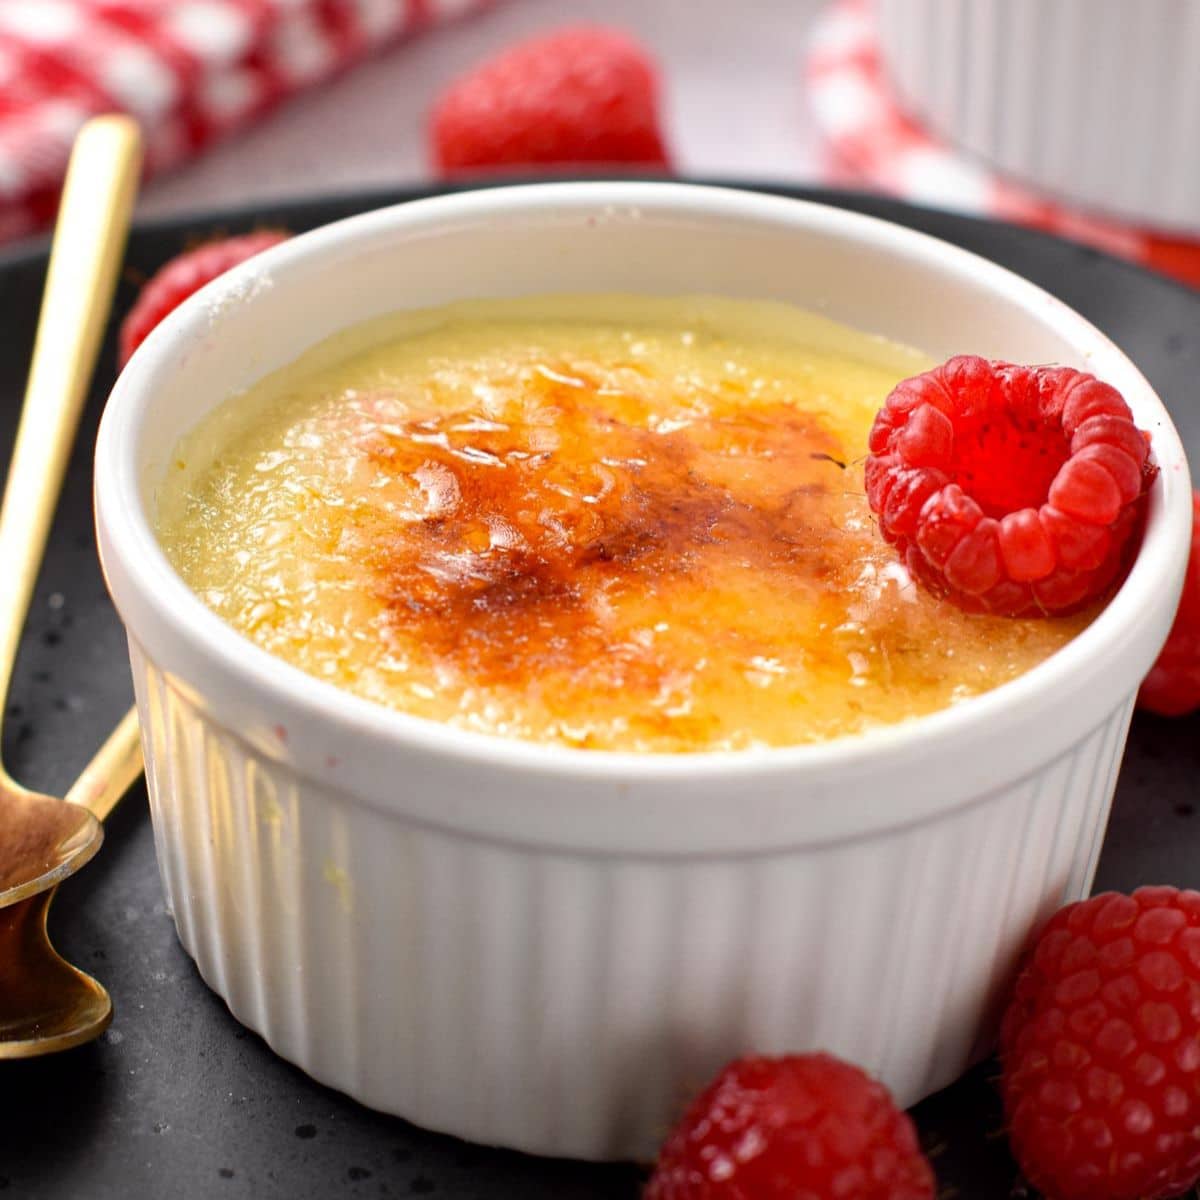 a ramekin filled with a creme brulee mixture topped with crunchy caramel golden layer and a fresh raspberry on side